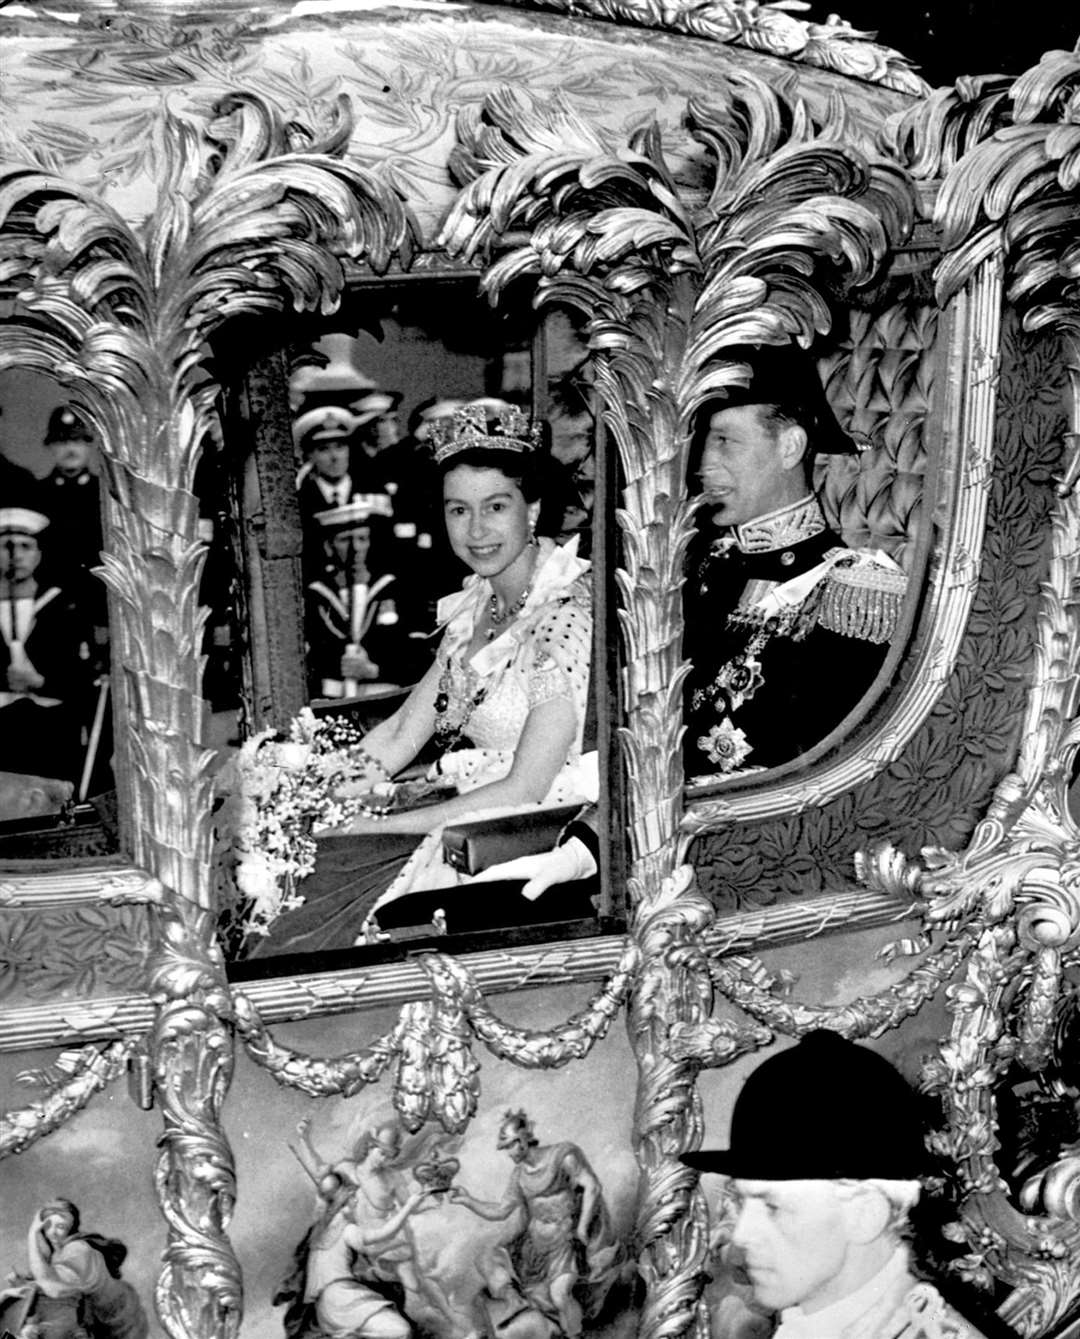 The Queen, accompanied by the Duke of Edinburgh, on her way to the abbey in 1953 (PA)